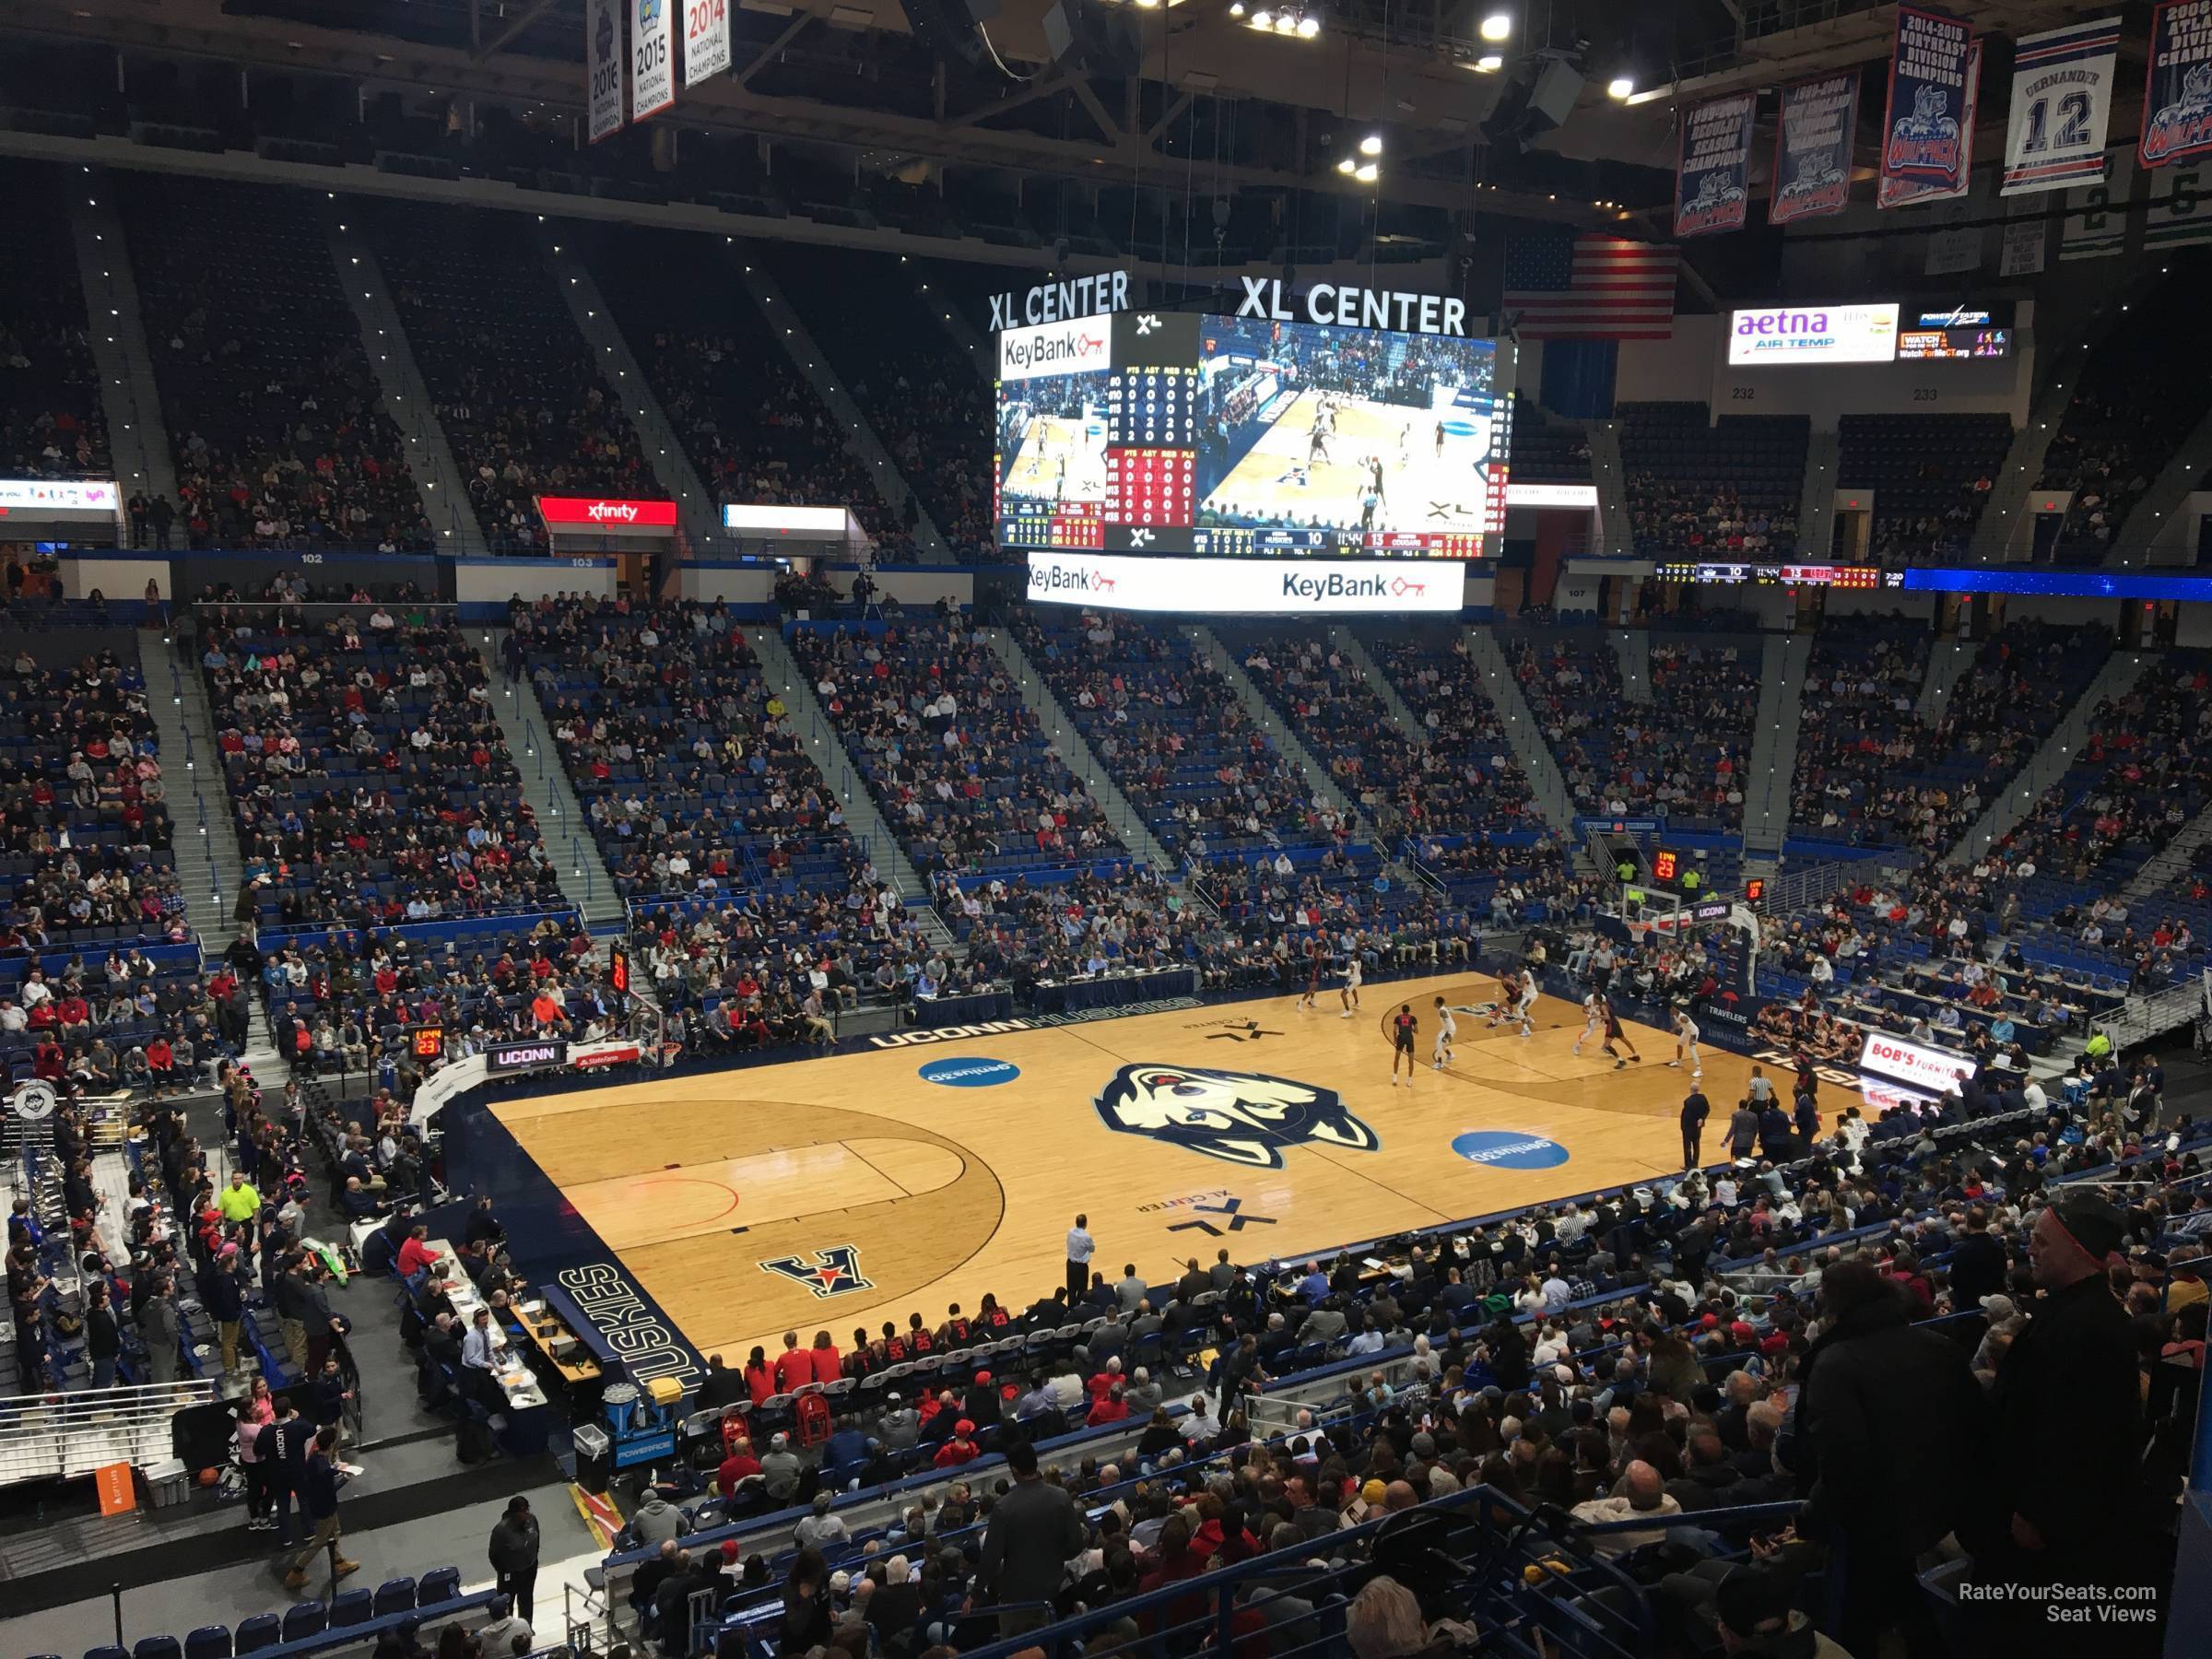 section 218, row a seat view  - xl center